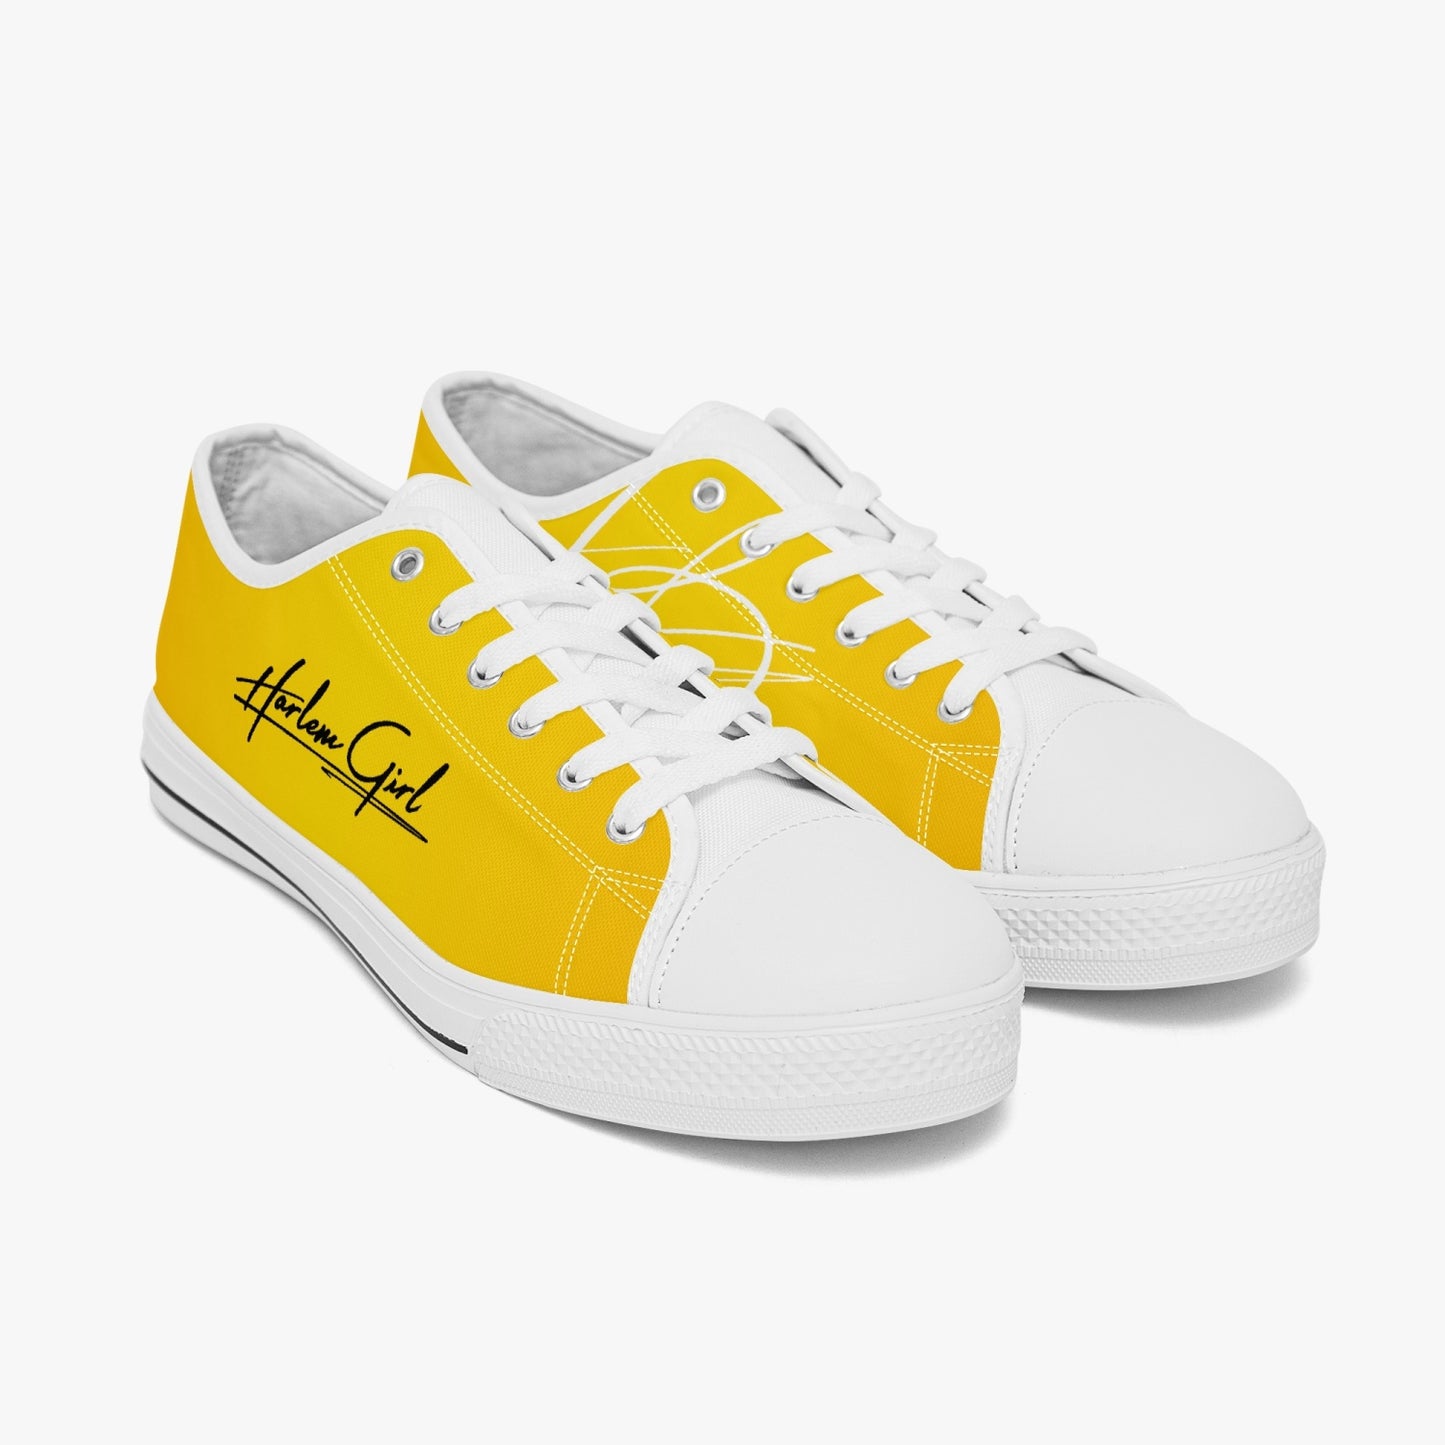 Harlem Girl "Coolee High" Womens Low-Top Canvas Sneaks - Gold